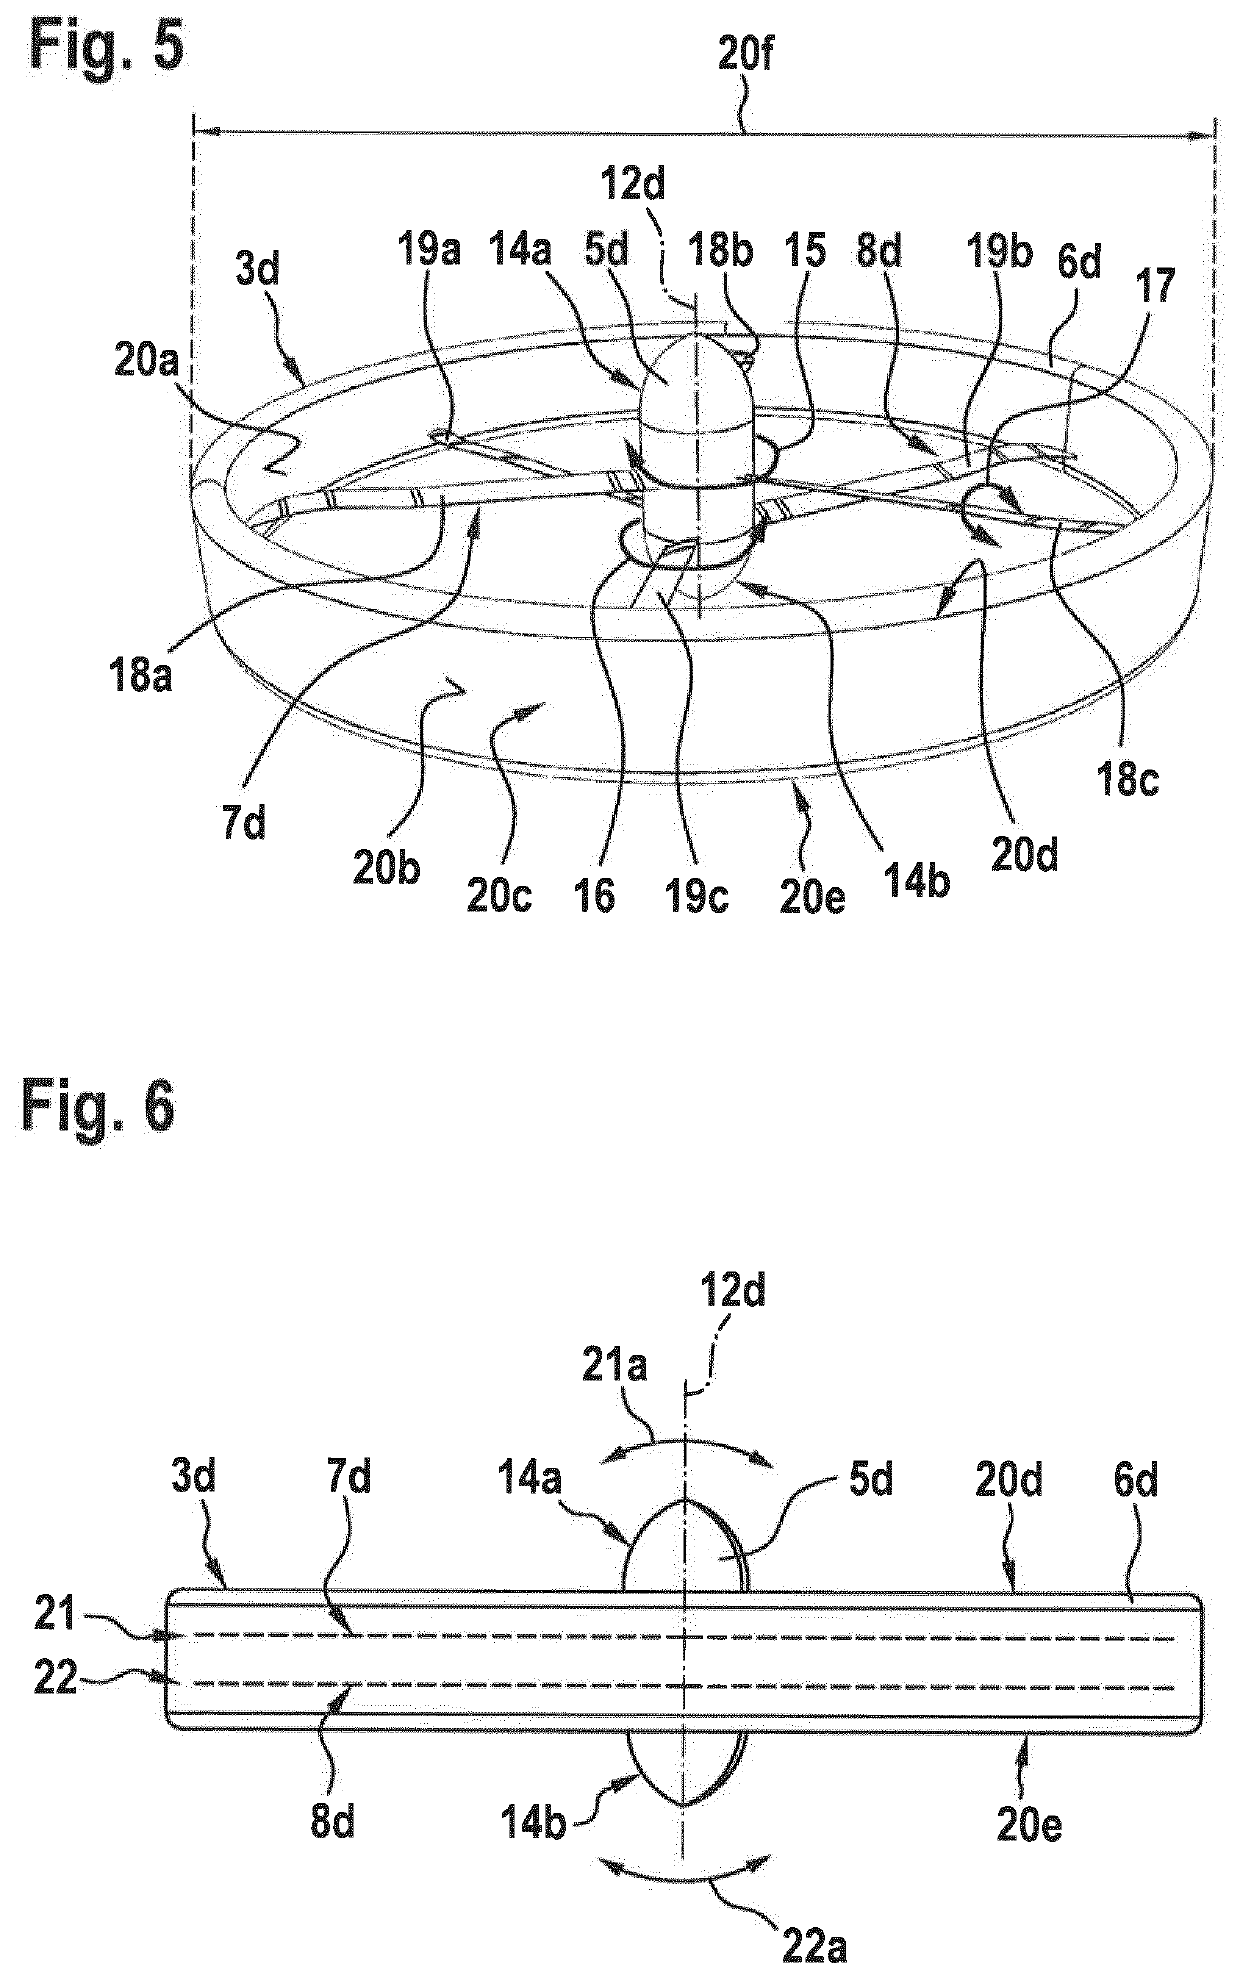 Multirotor electric aircraft with redundant security architecture